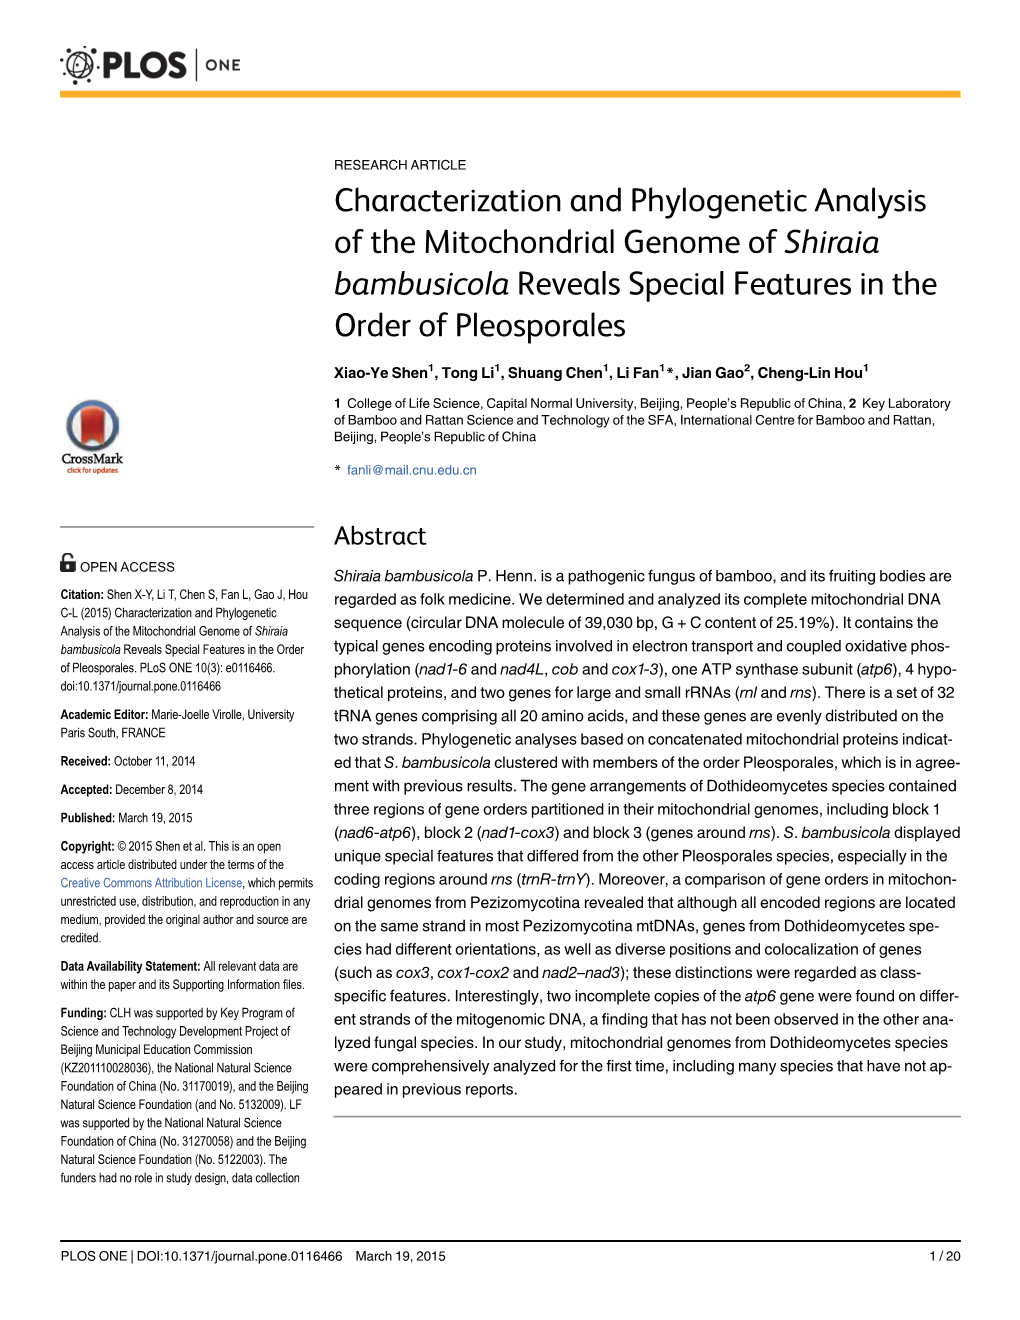 Characterization and Phylogenetic Analysis of the Mitochondrial Genome of Shiraia Bambusicola Reveals Special Features in the Order of Pleosporales